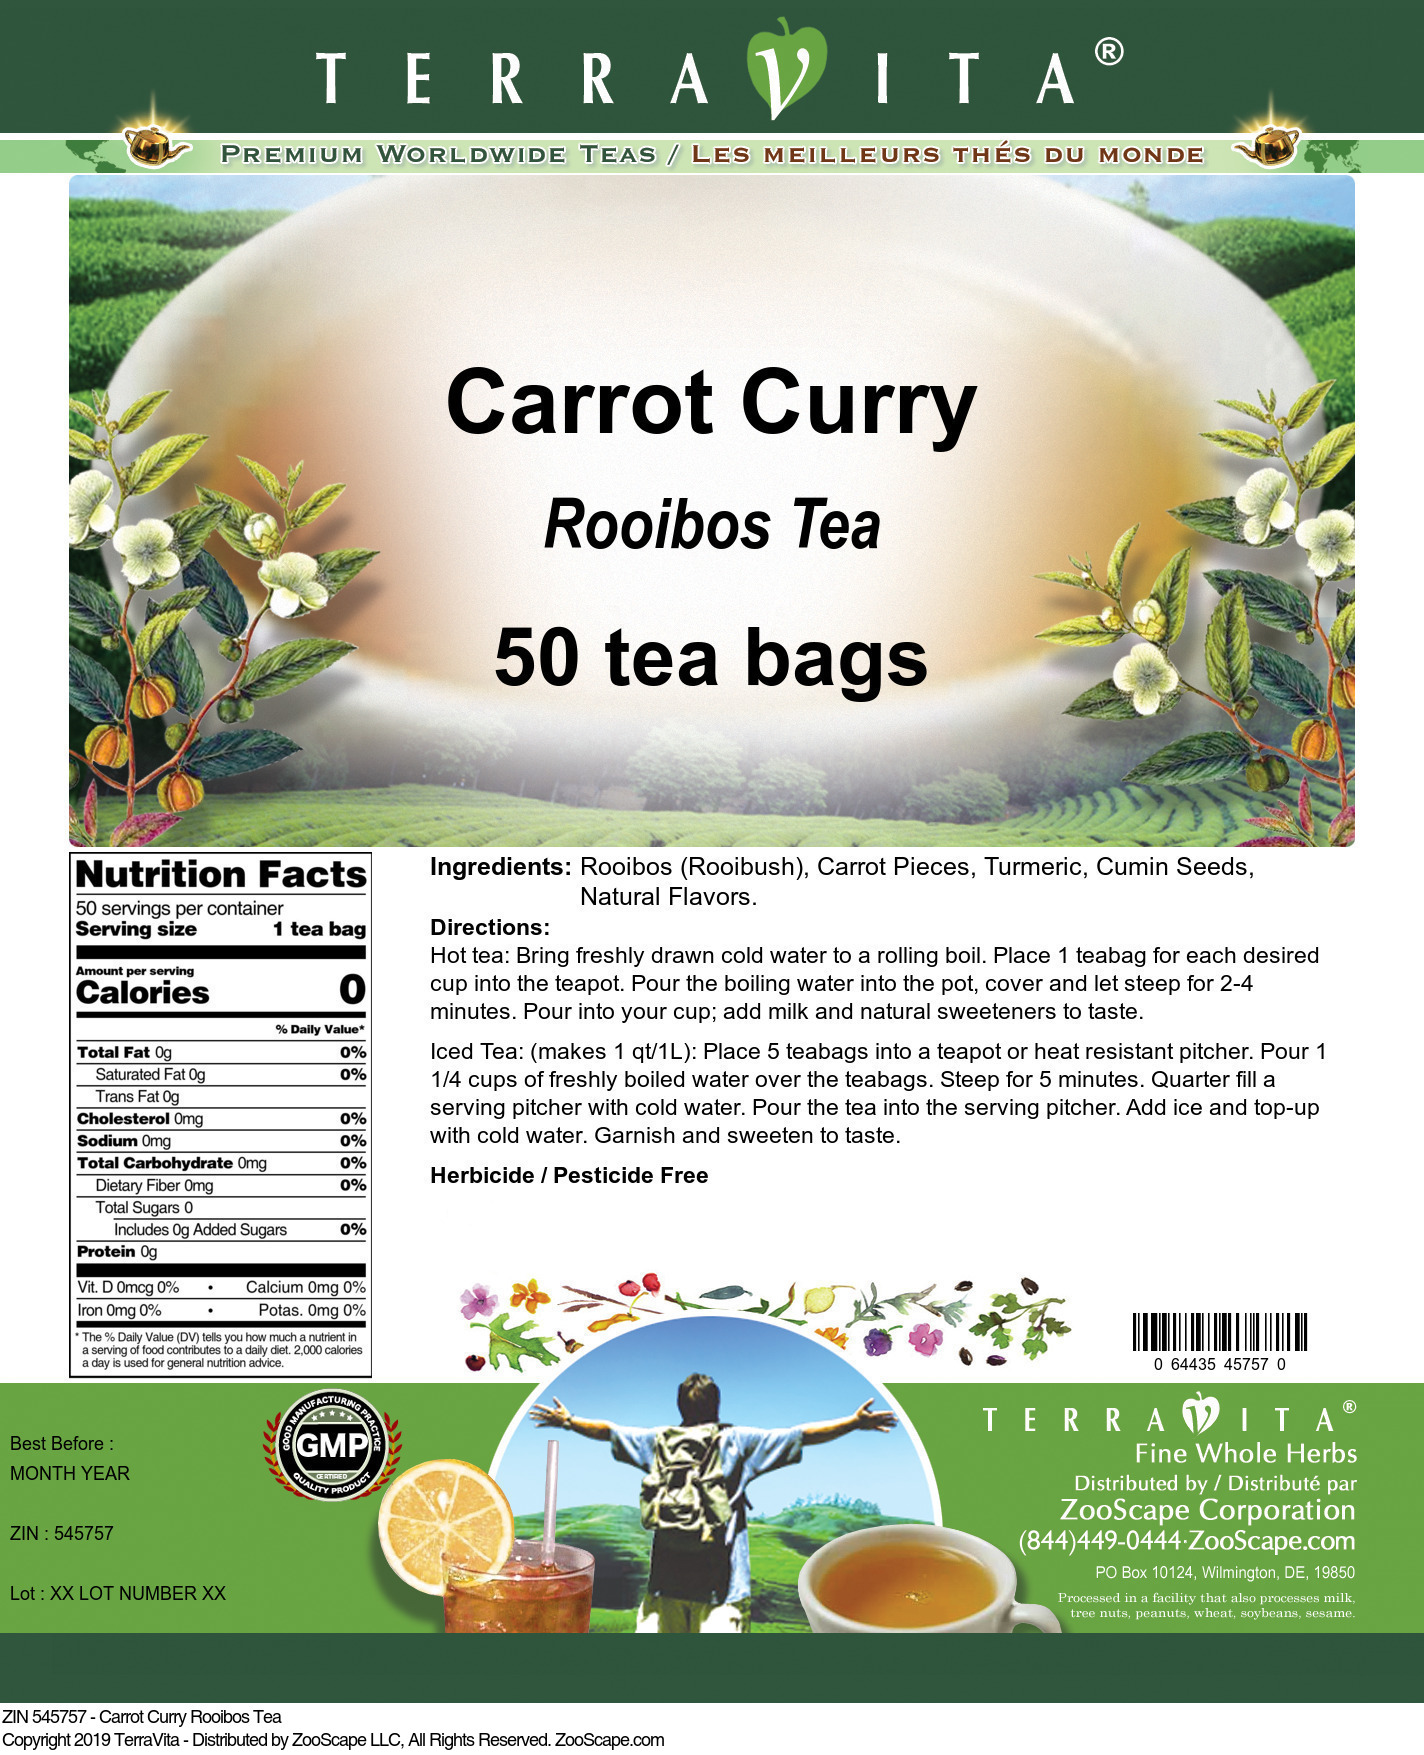 Carrot Curry Rooibos Tea - Label